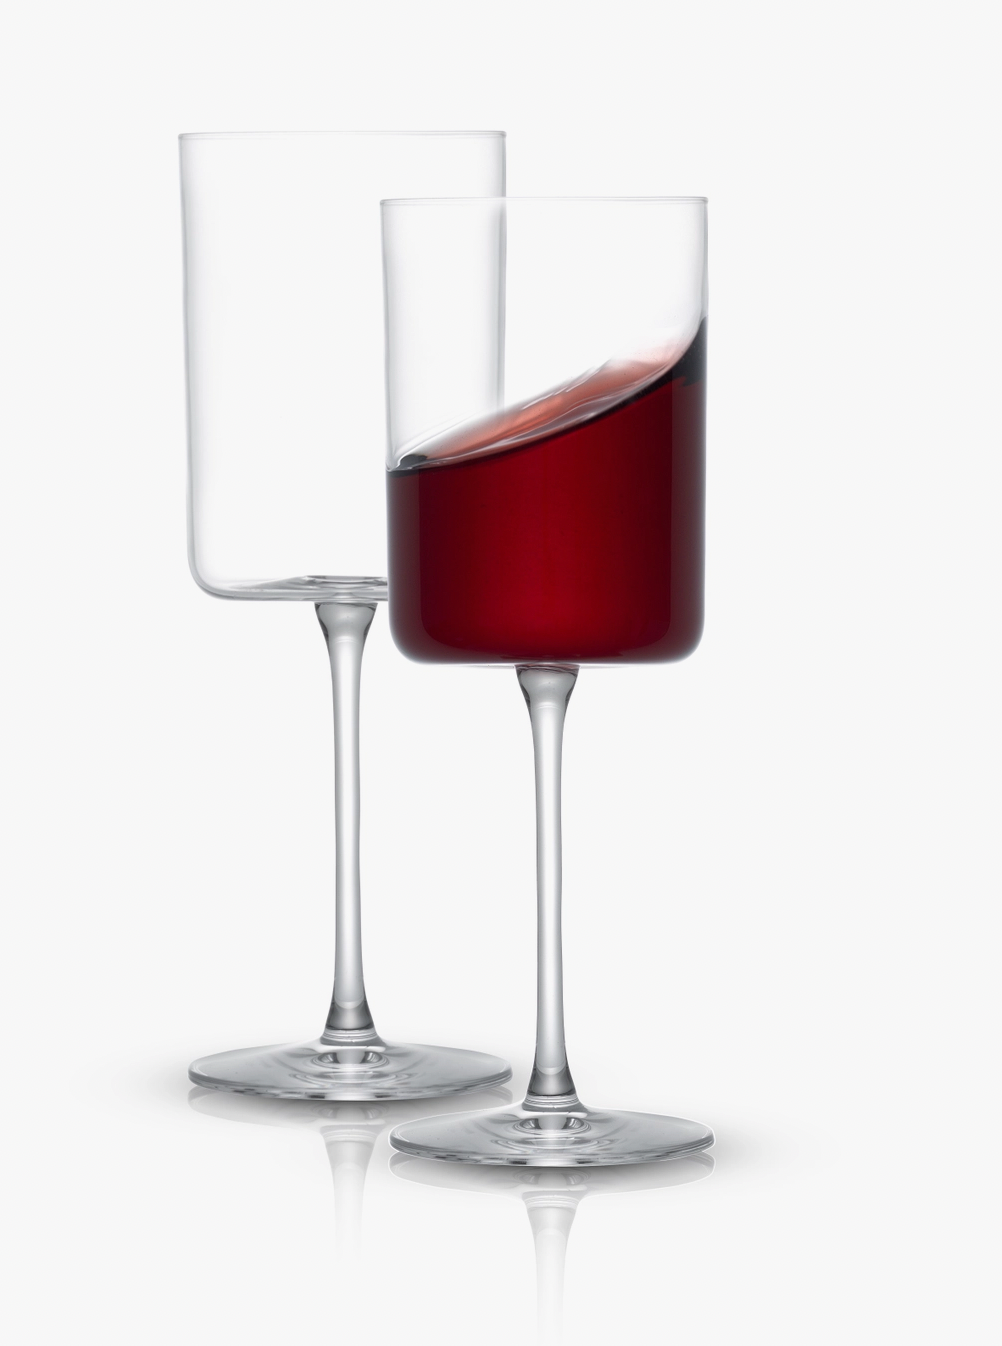 Claire Crystal Stemmed Red Wine Glasses